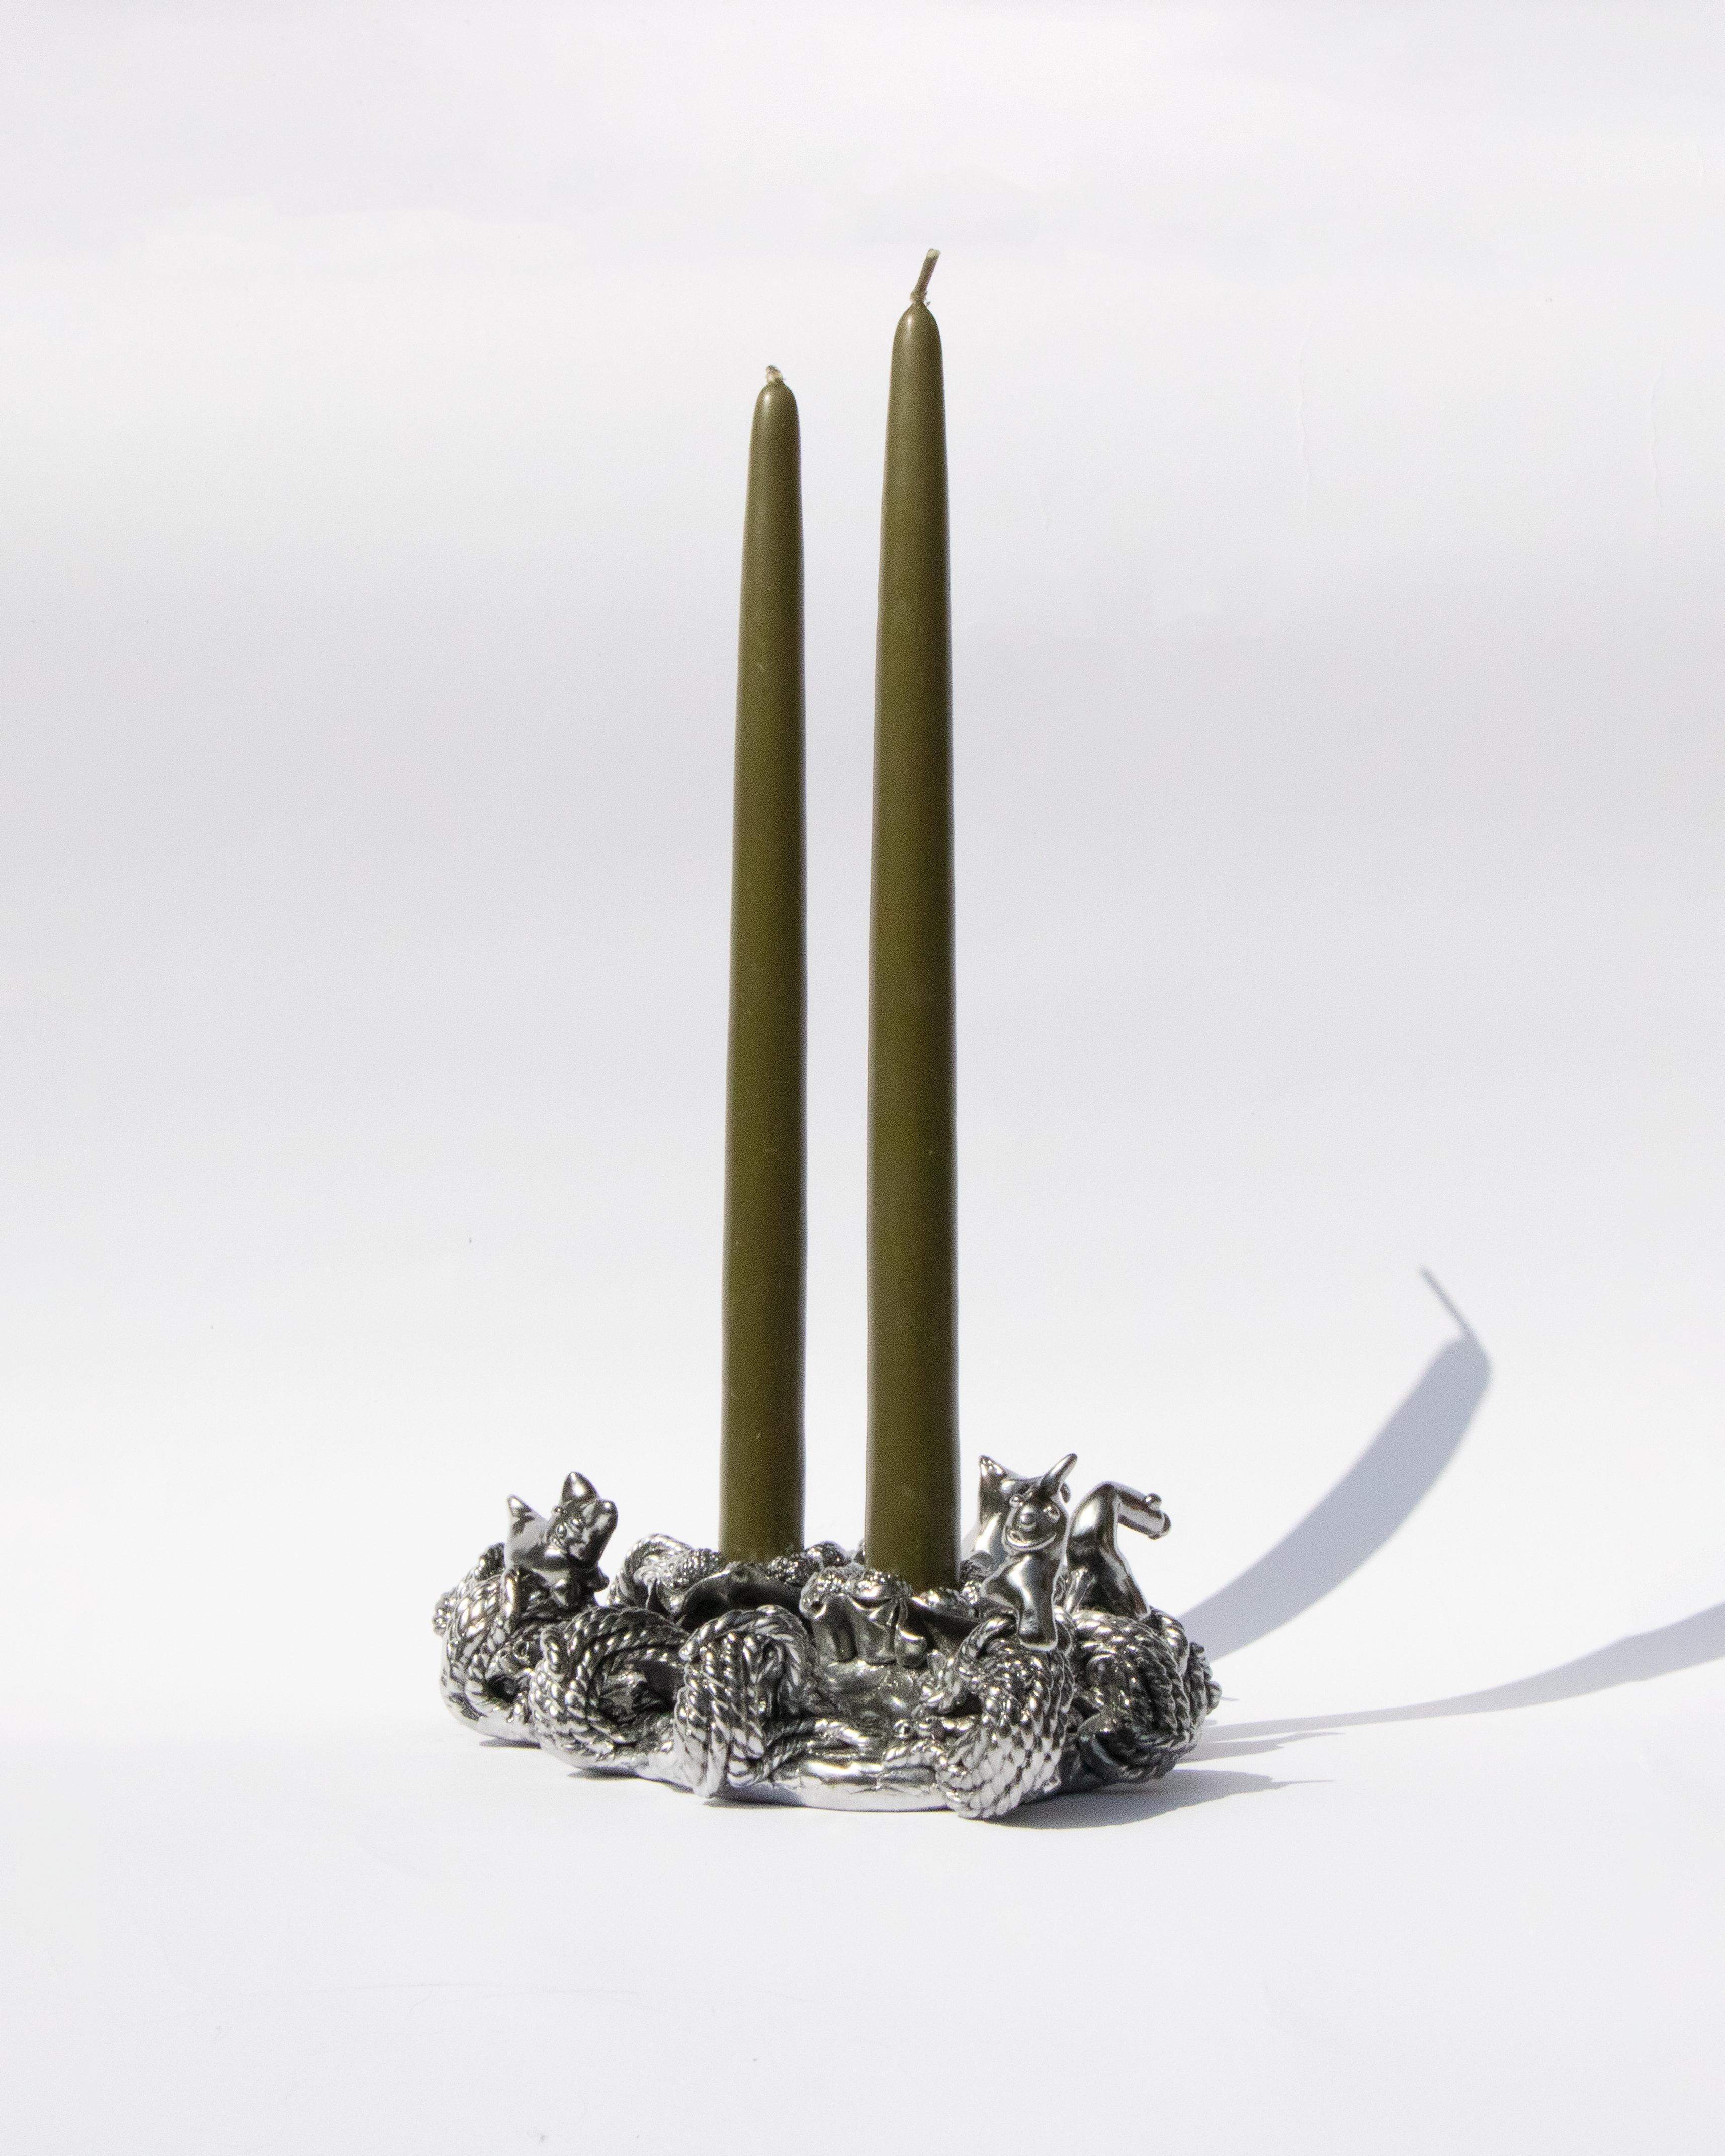 The shapes of this candlestick, take inspiration from the story of Noah's Ark, re-enacted in a not too distant future, where rising sea levels have submerged everything. The protagonists, no longer recognizable animals, but a series of fantastical